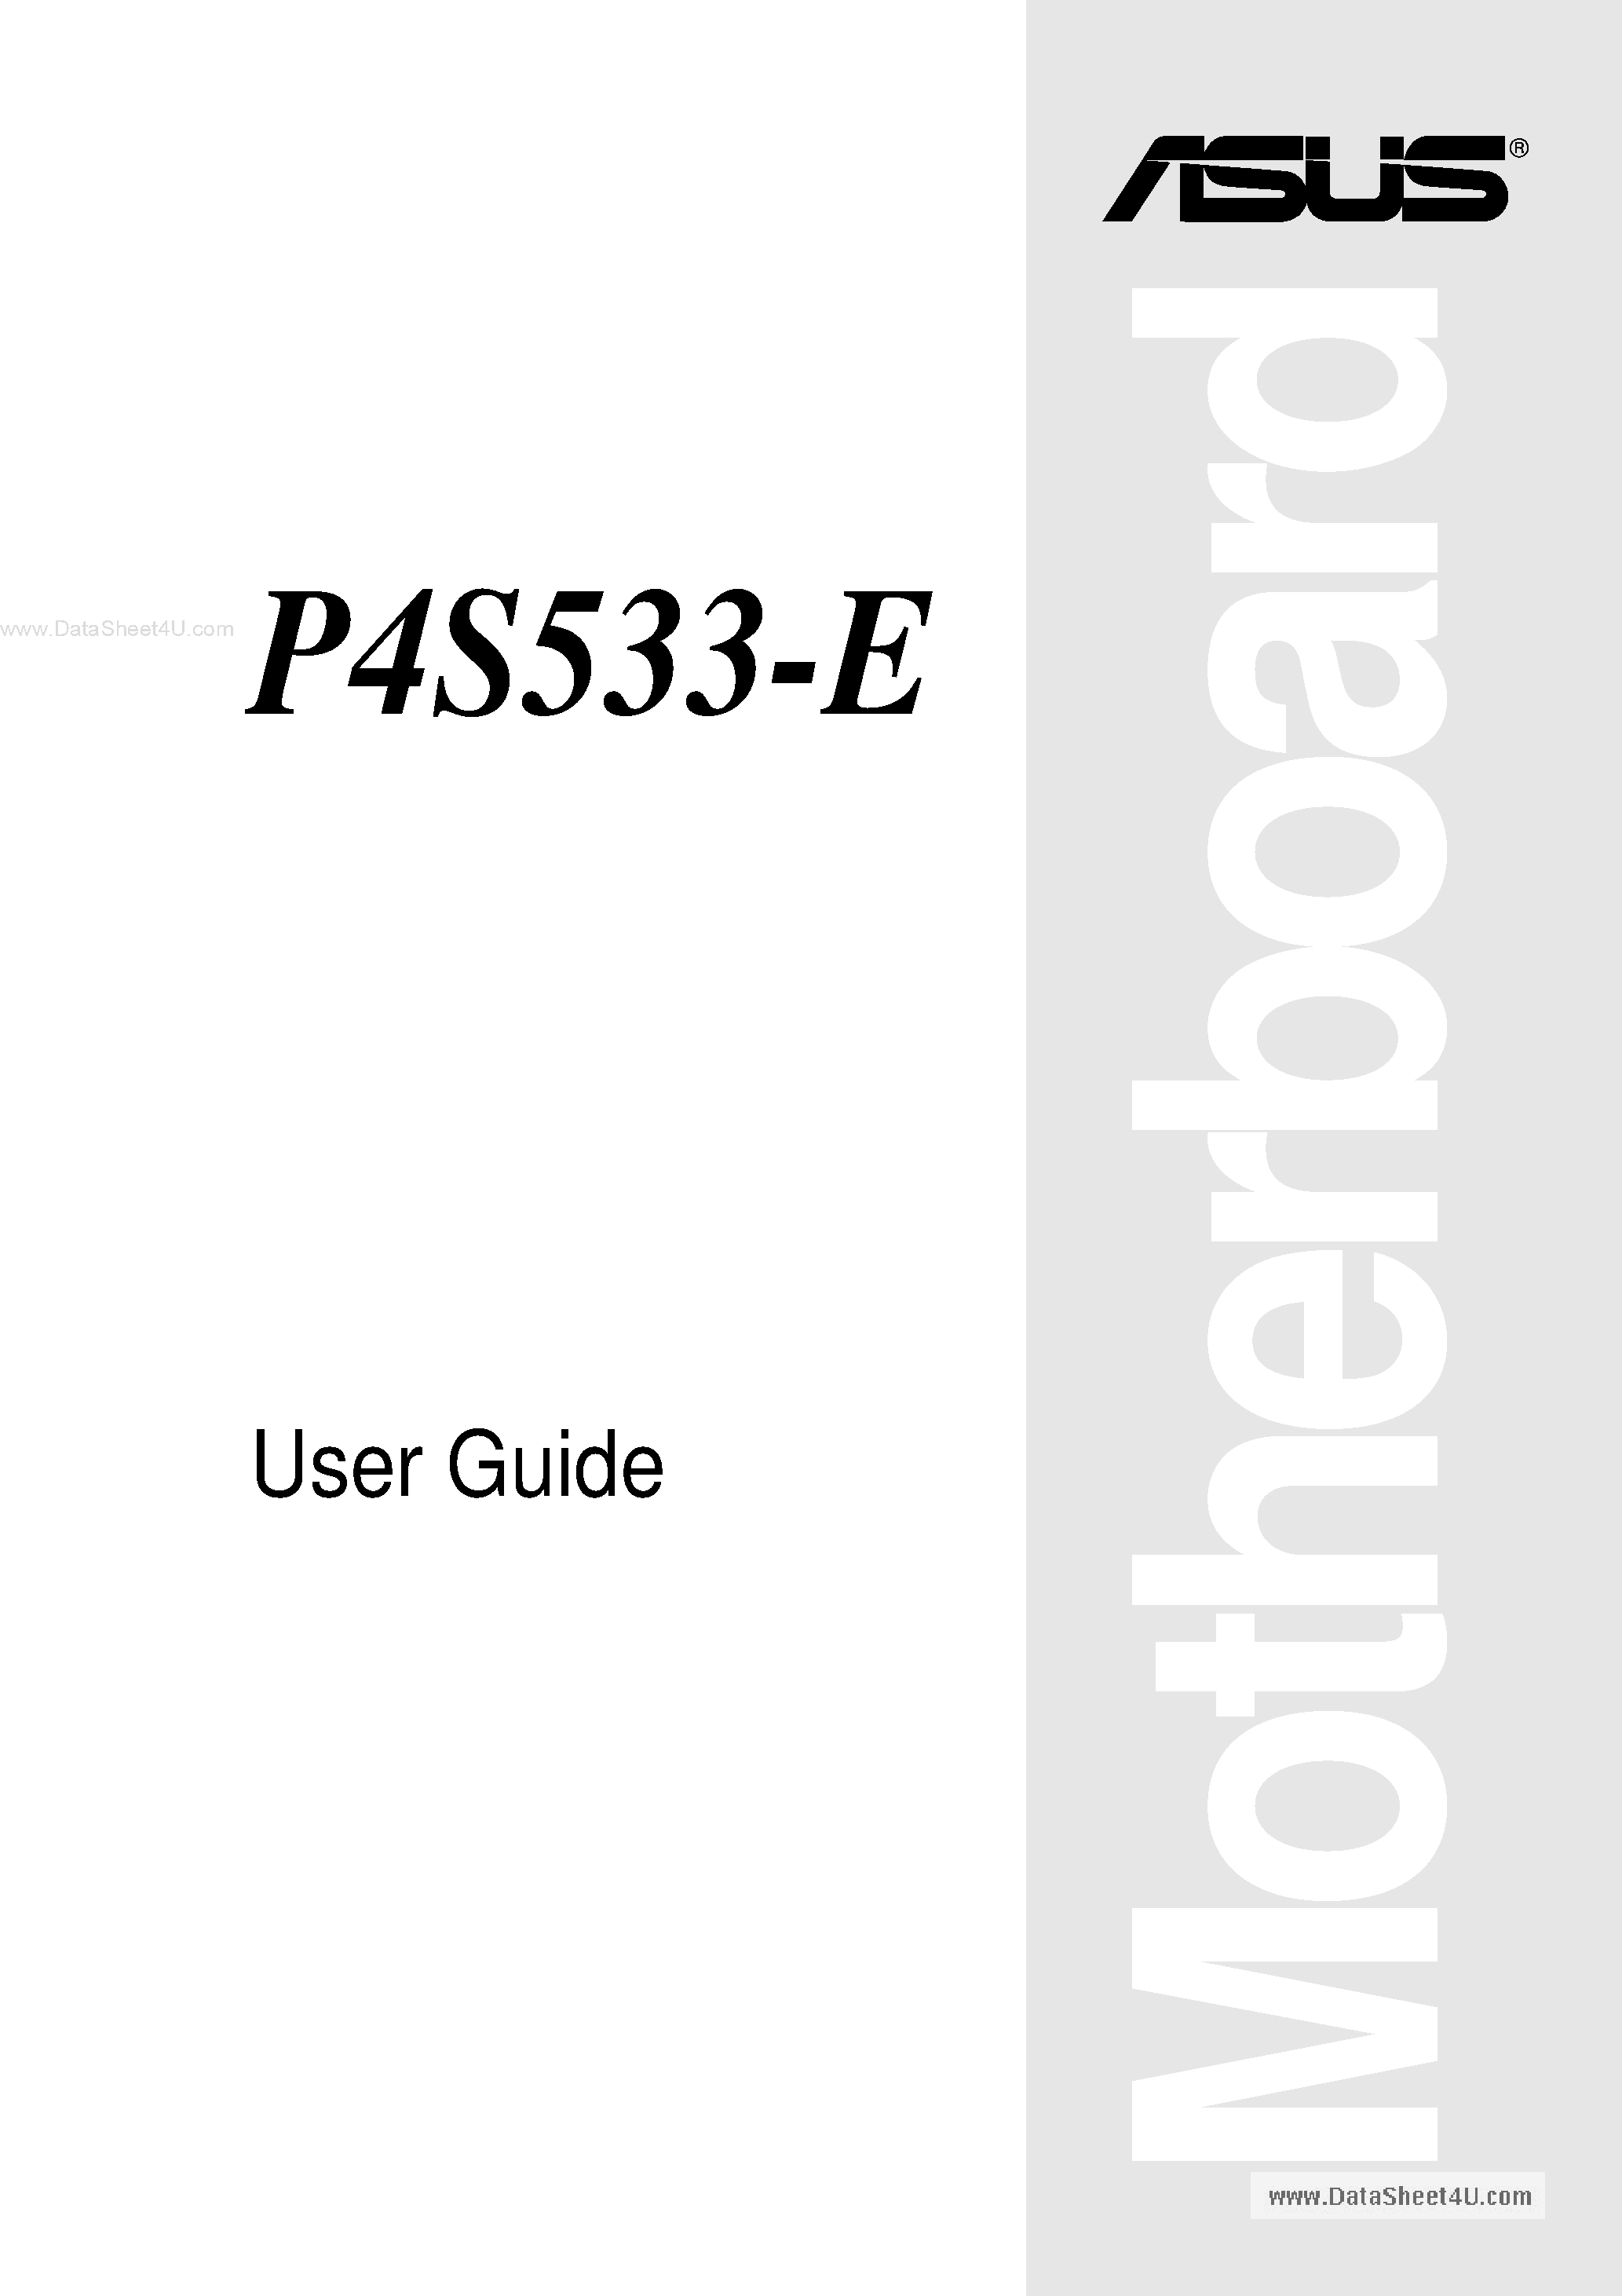 Datasheet P4S533-E - User Guide page 1